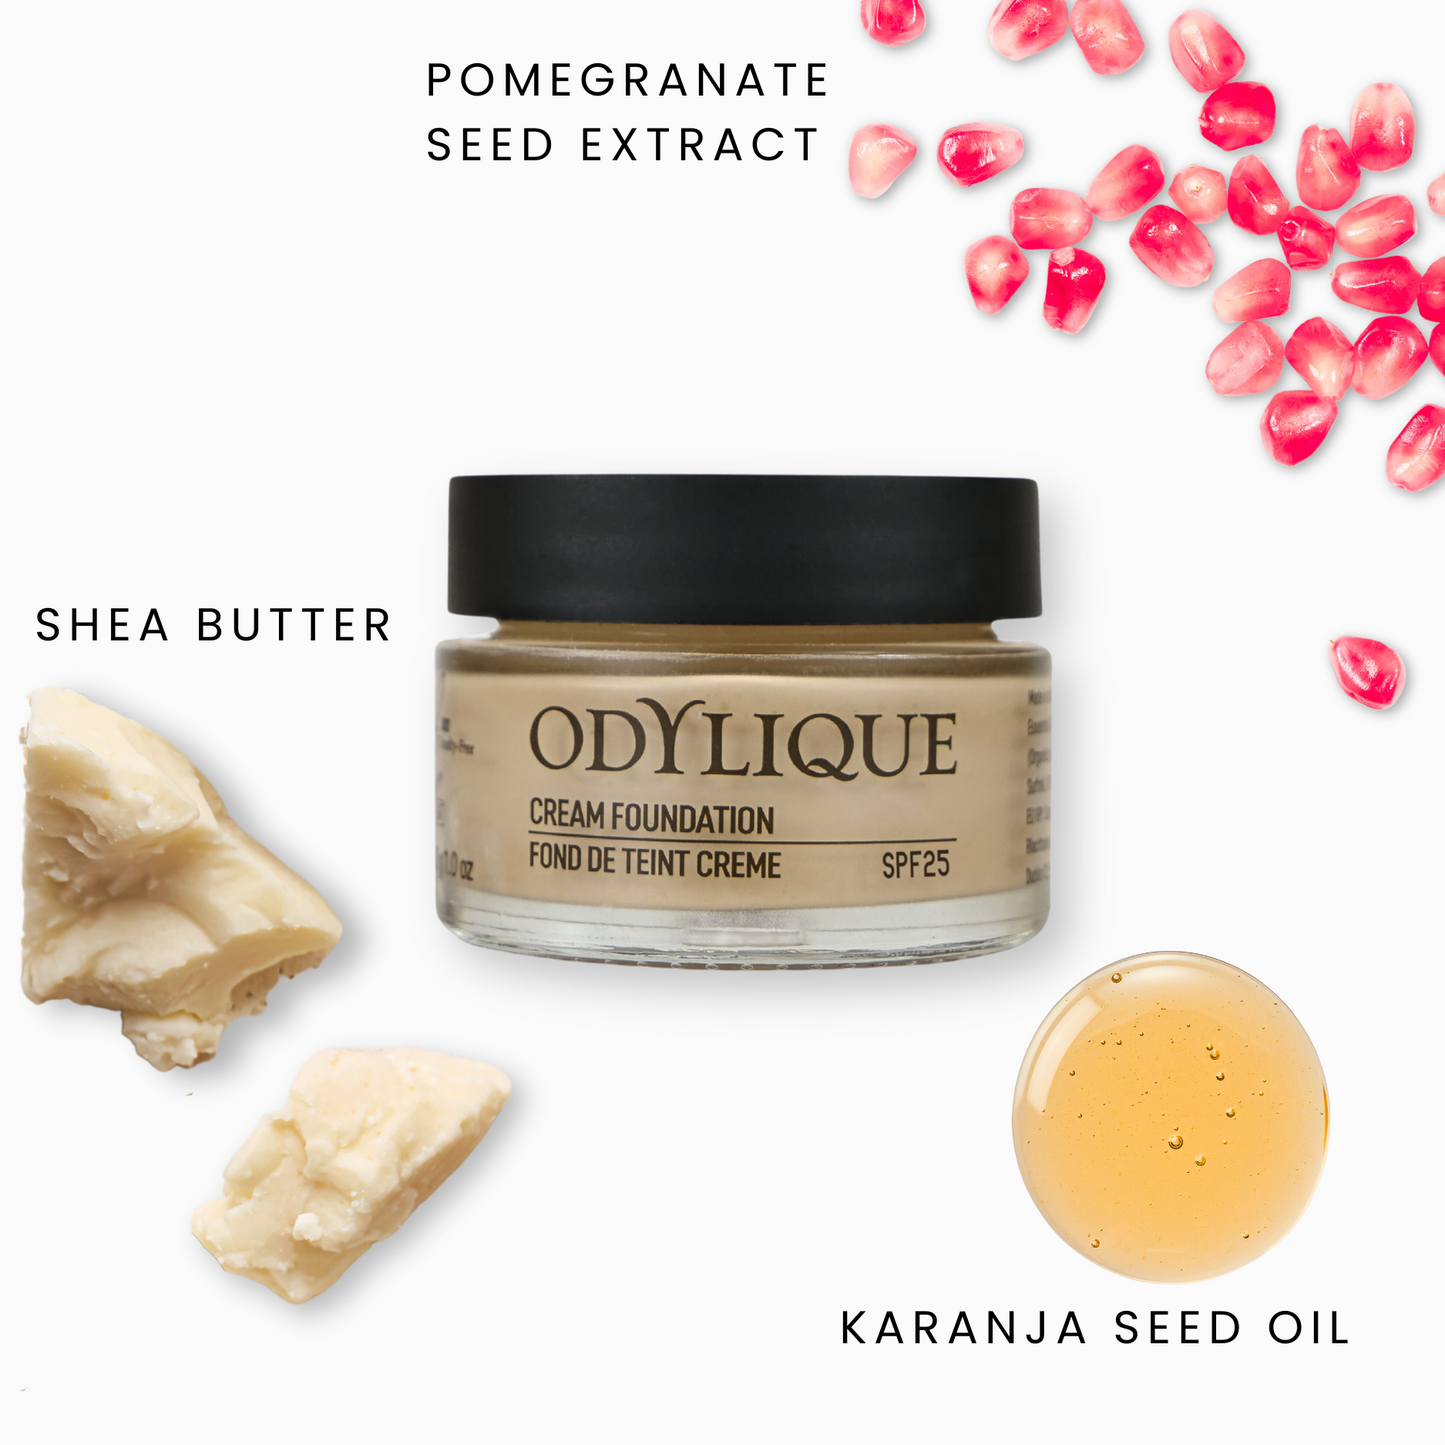 infographic of odylique cream foundation with spf 25 showing glass jar with beige coloured foundation inside and some images of the ingredients; shea butter, pomegranate seed extract and karanja seed oil